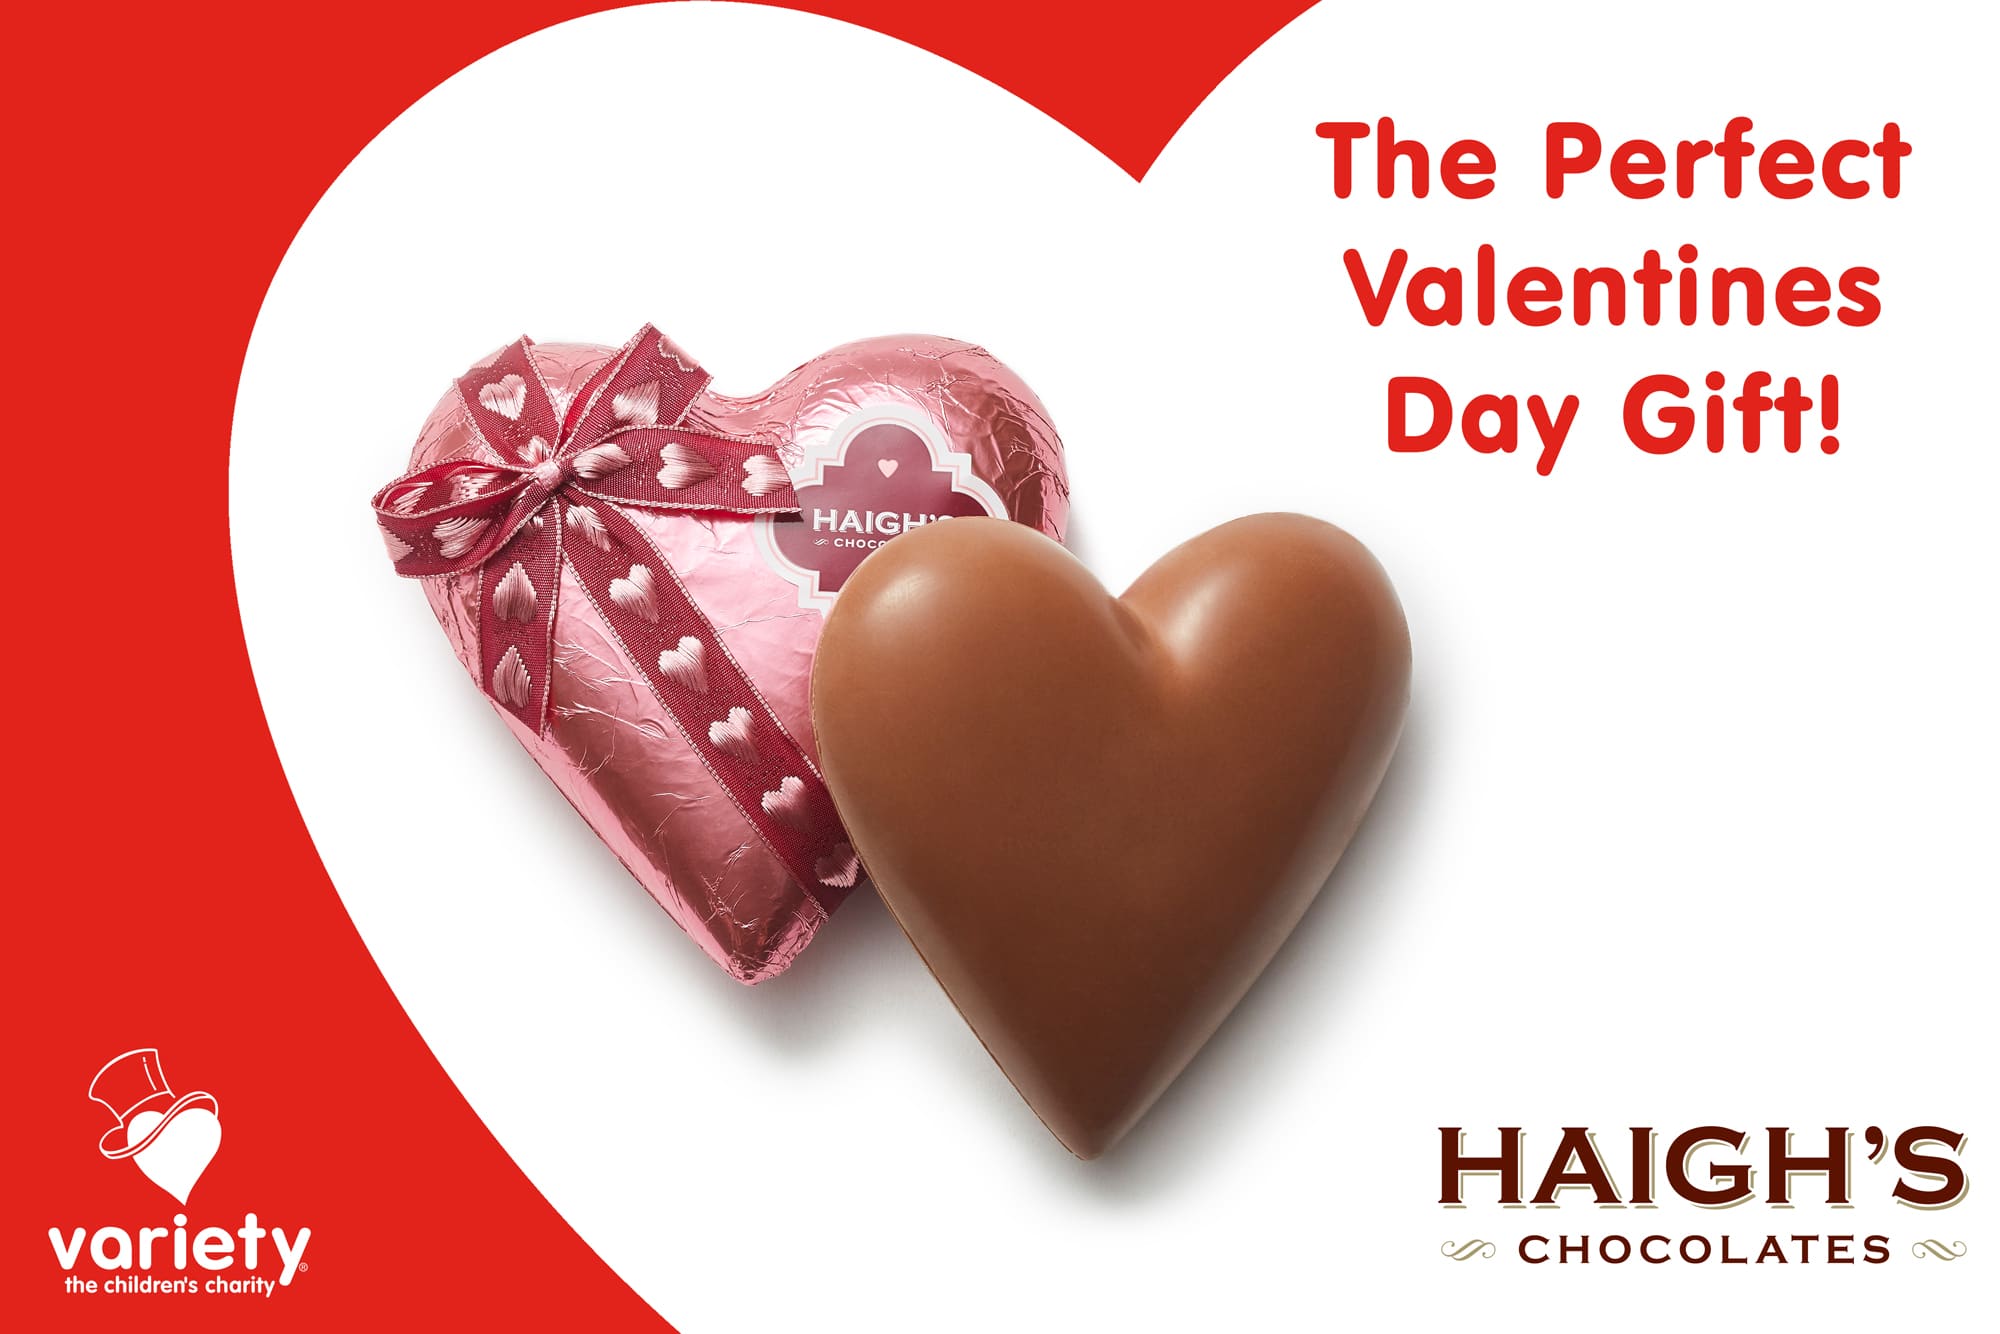 Support Variety SA this Valentines Day with Haigh’s Chocolates